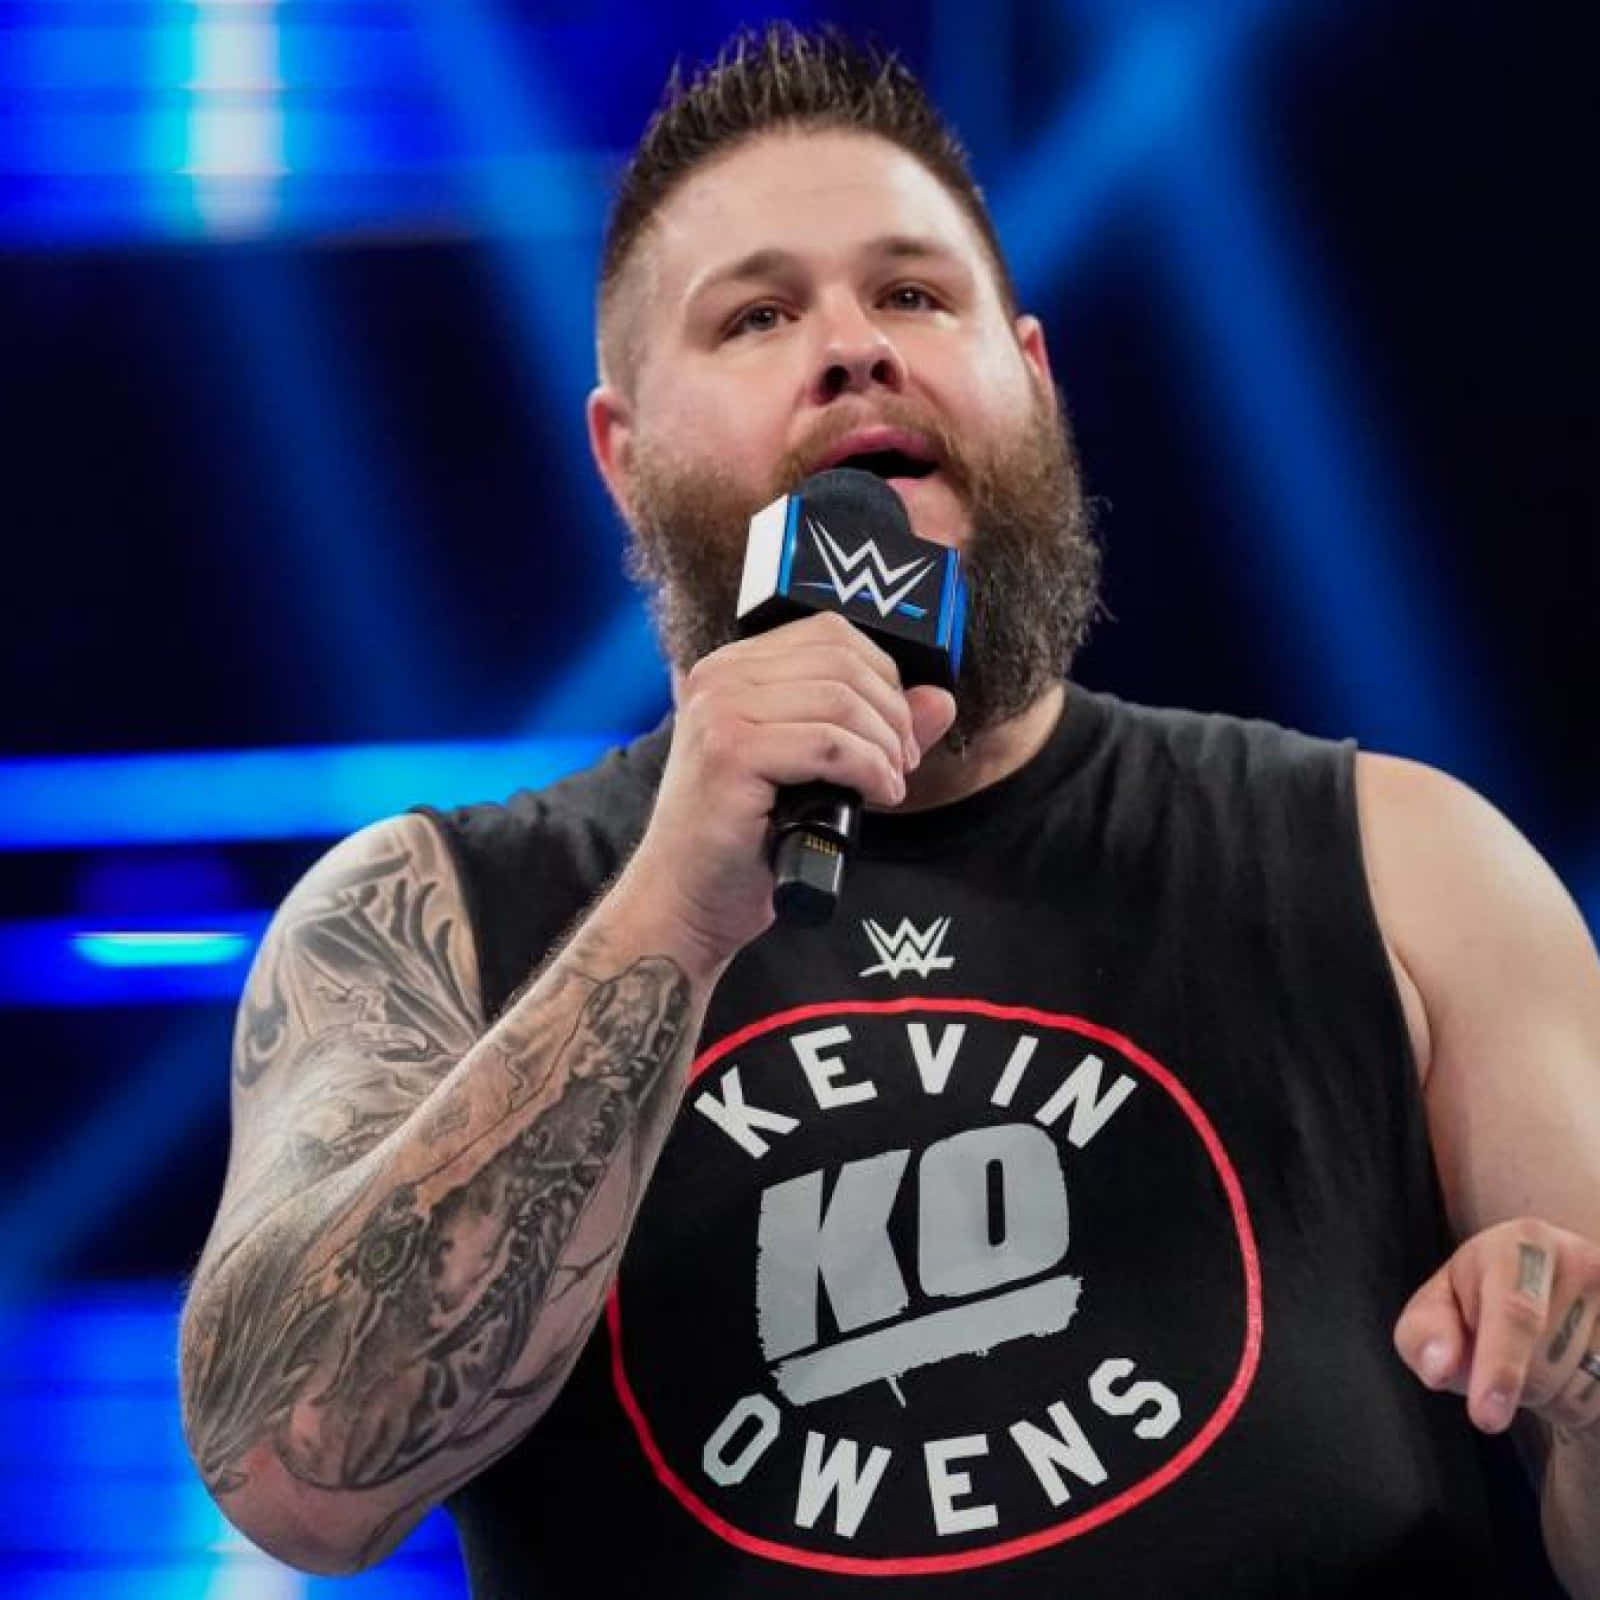 Kevin Owens Wrestler Media Personality Background